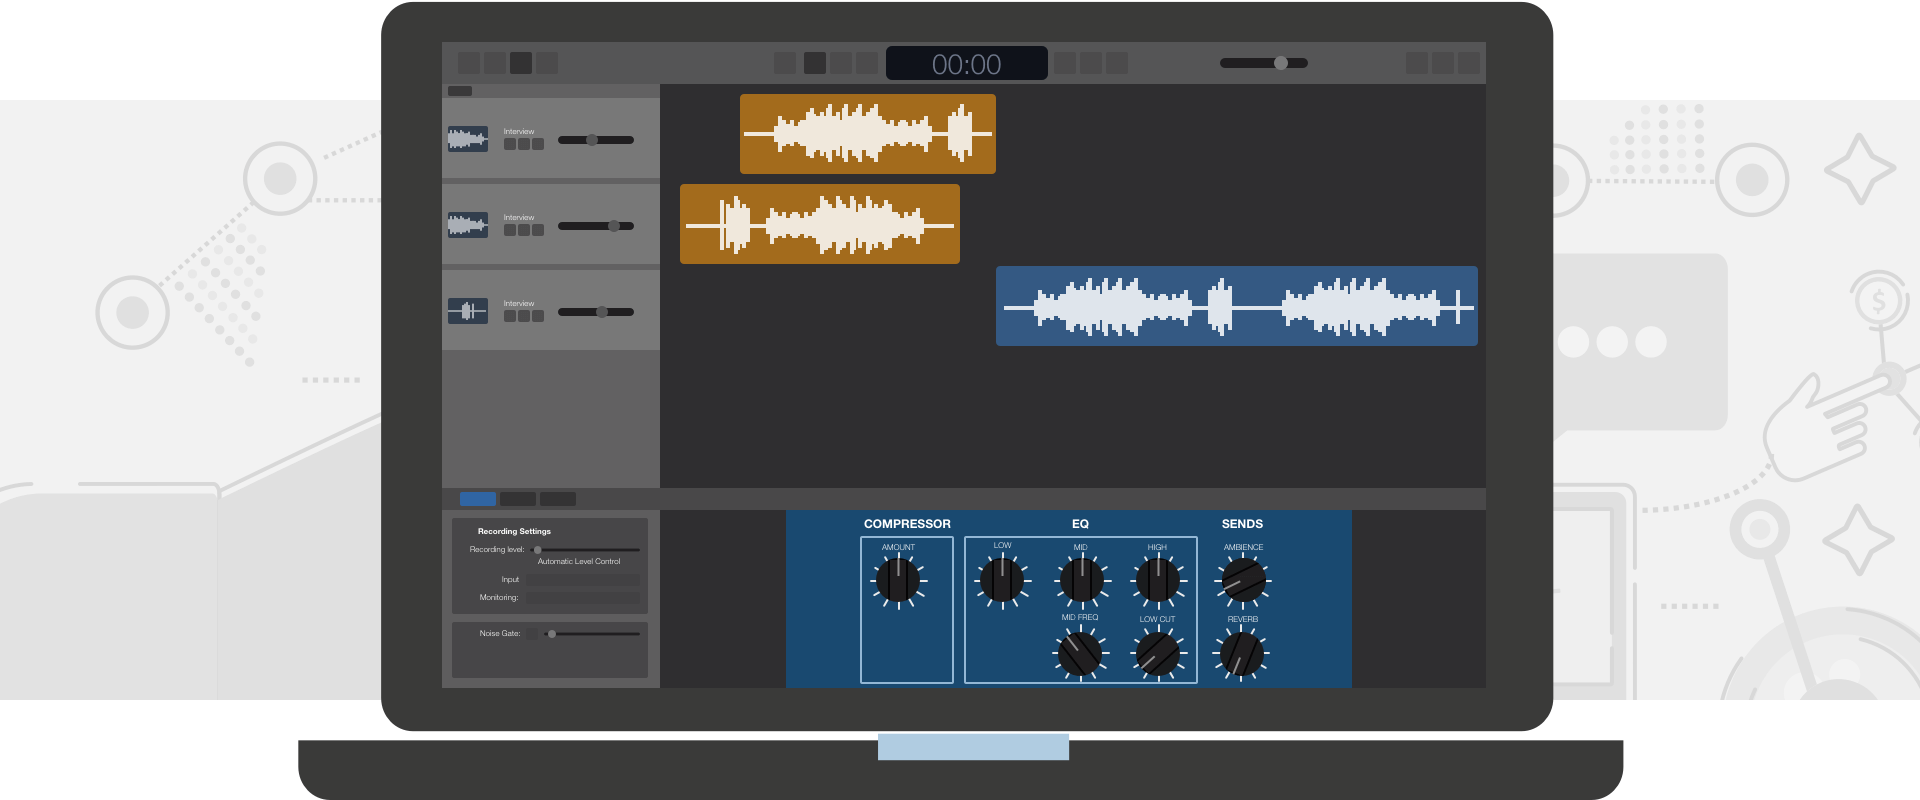 app for editing mp3 recordings on mac